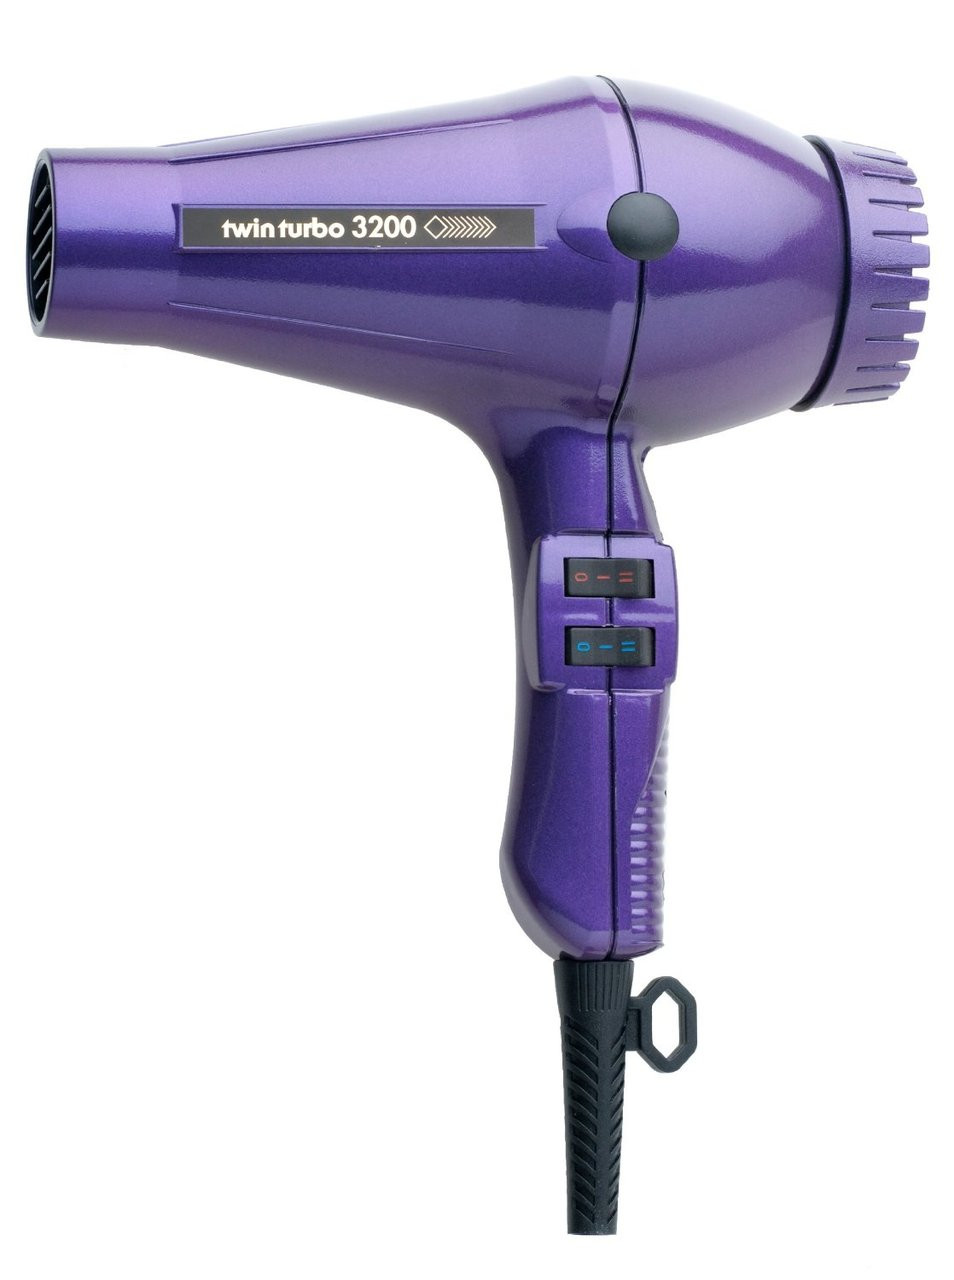 TWIN TURBO POWER 3200 PROFESSIONAL HAIR DRYER PURPLE MADE IN ITAL -  